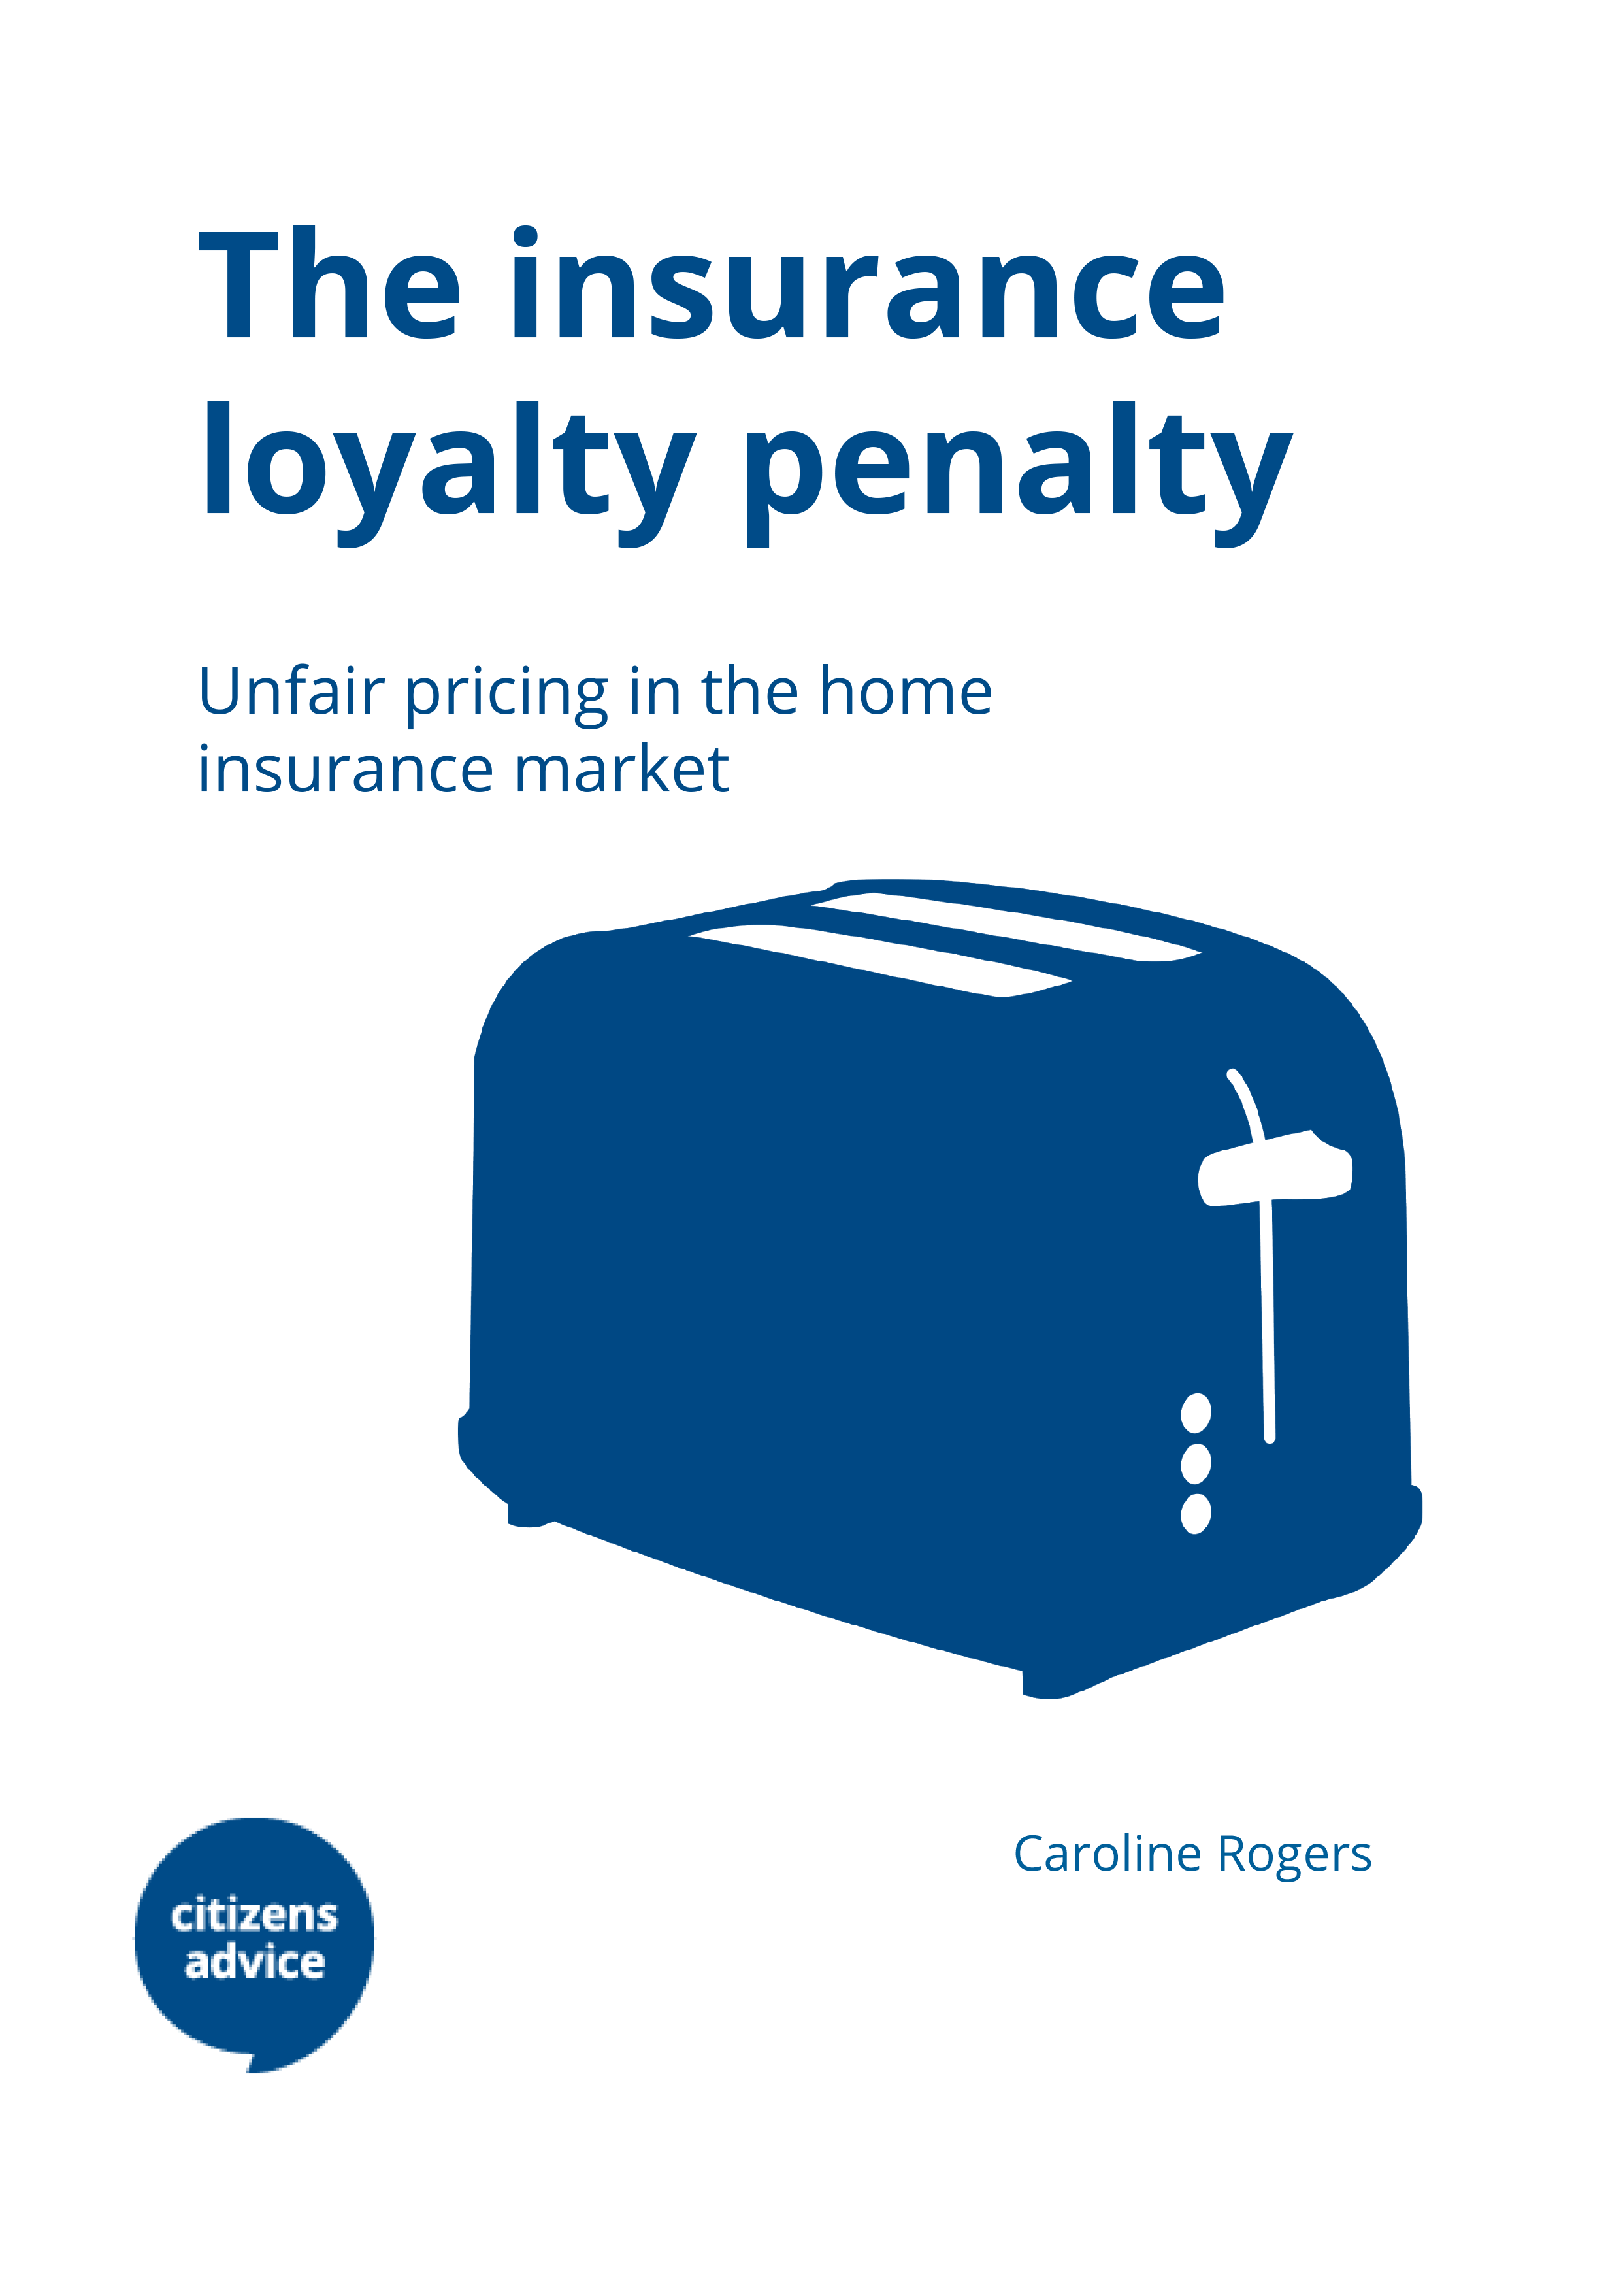 The insurance loyalty penalty: unfair pricing in the home insurance market